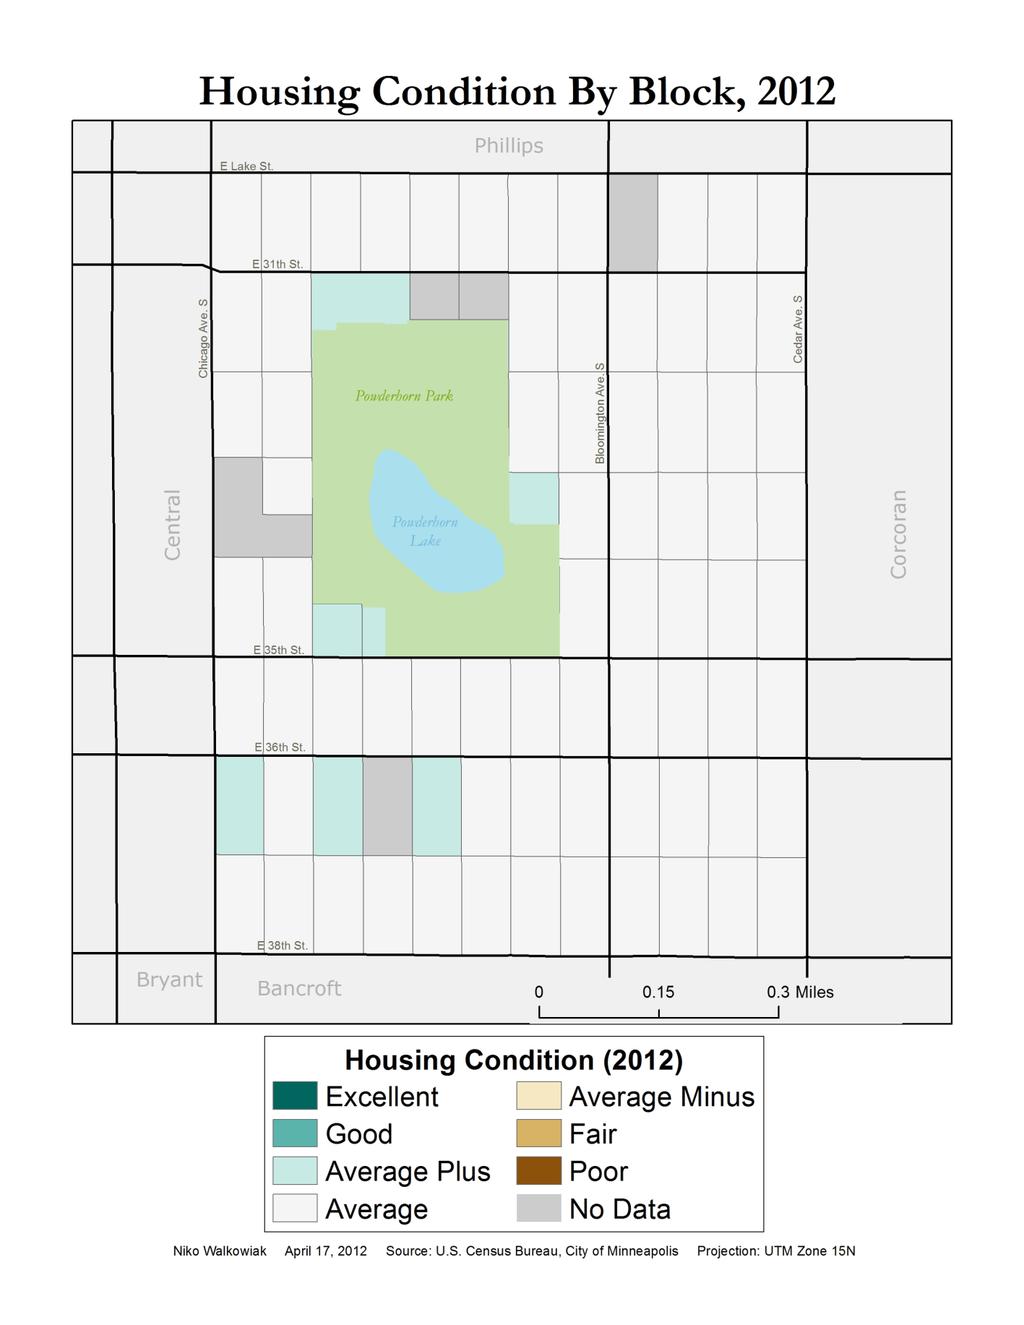 Map 7: Housing Condition by Block, 2012